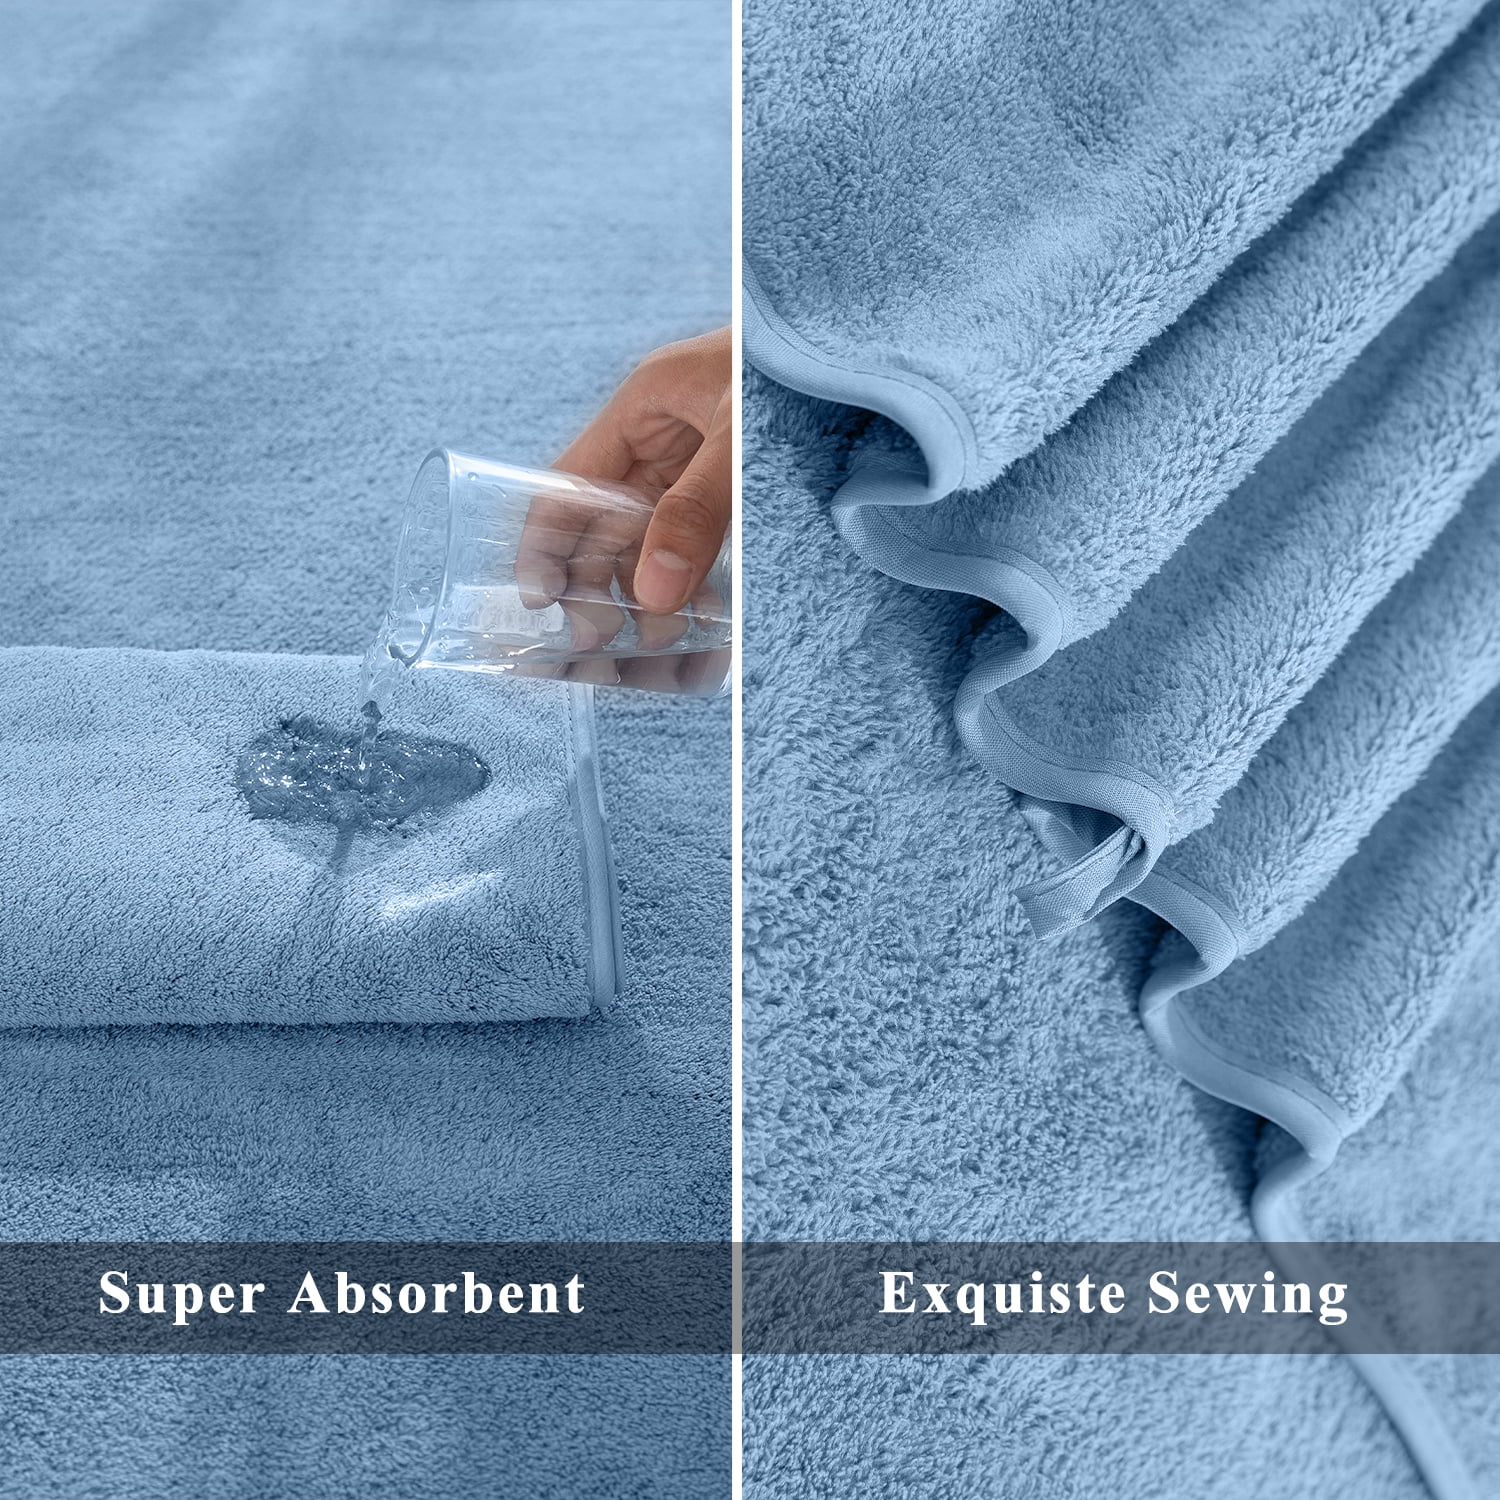 MAGGEA 4 Piece Oversized Bath Sheet Towels (35 x 70 in,Blue) 700 GSM Ultra  Soft Bath Towel Set Thick Large Cozy Plush Highly Absorbent Towels Quick